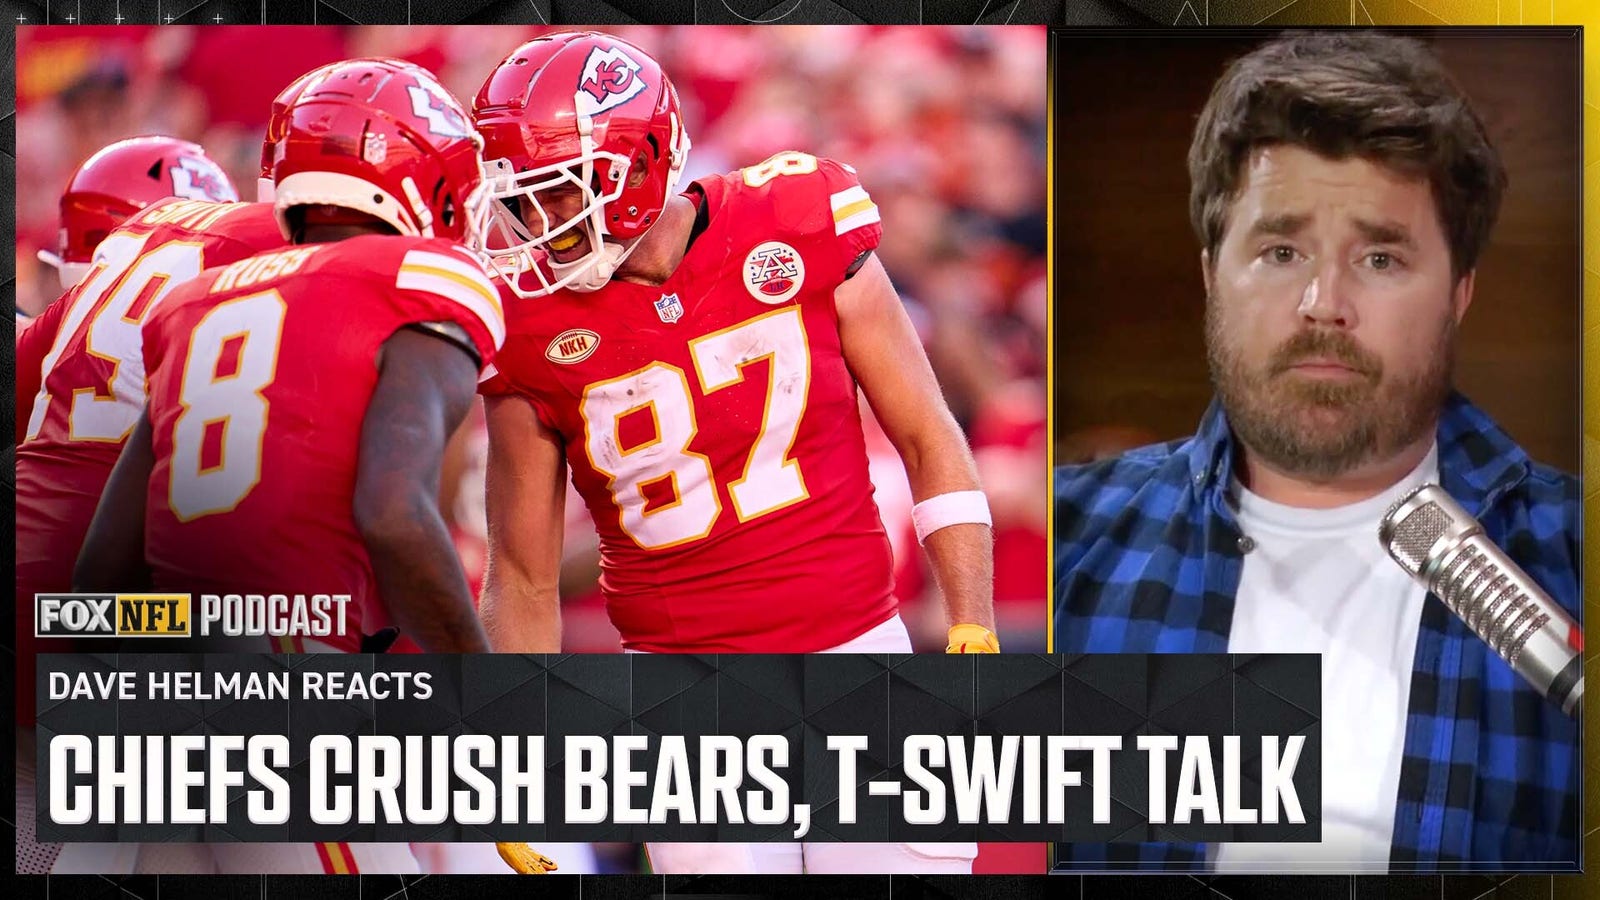 Taylor Swift watches Chiefs roll over Bears in K.C. 